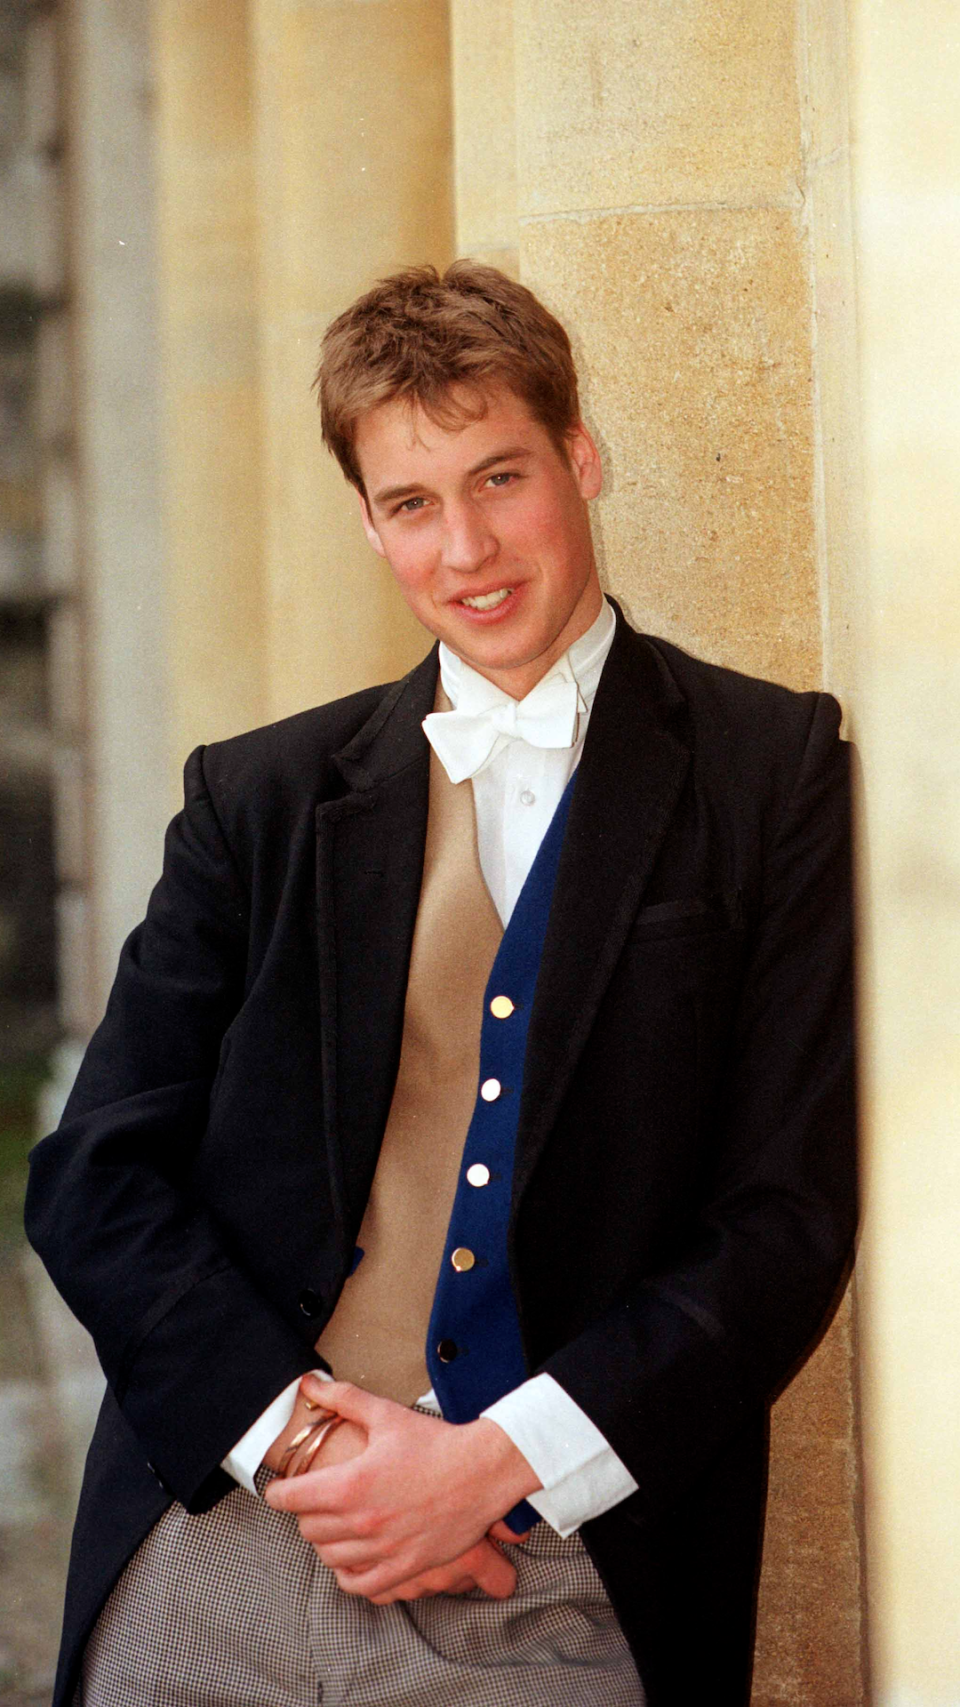 <p> In 2000, Prince William became one of 21 elected prefects at Eton - and posed for a photo to mark the occasion. After leaving the school, he went on to study geography at the University of St Andrews in Scotland. </p>